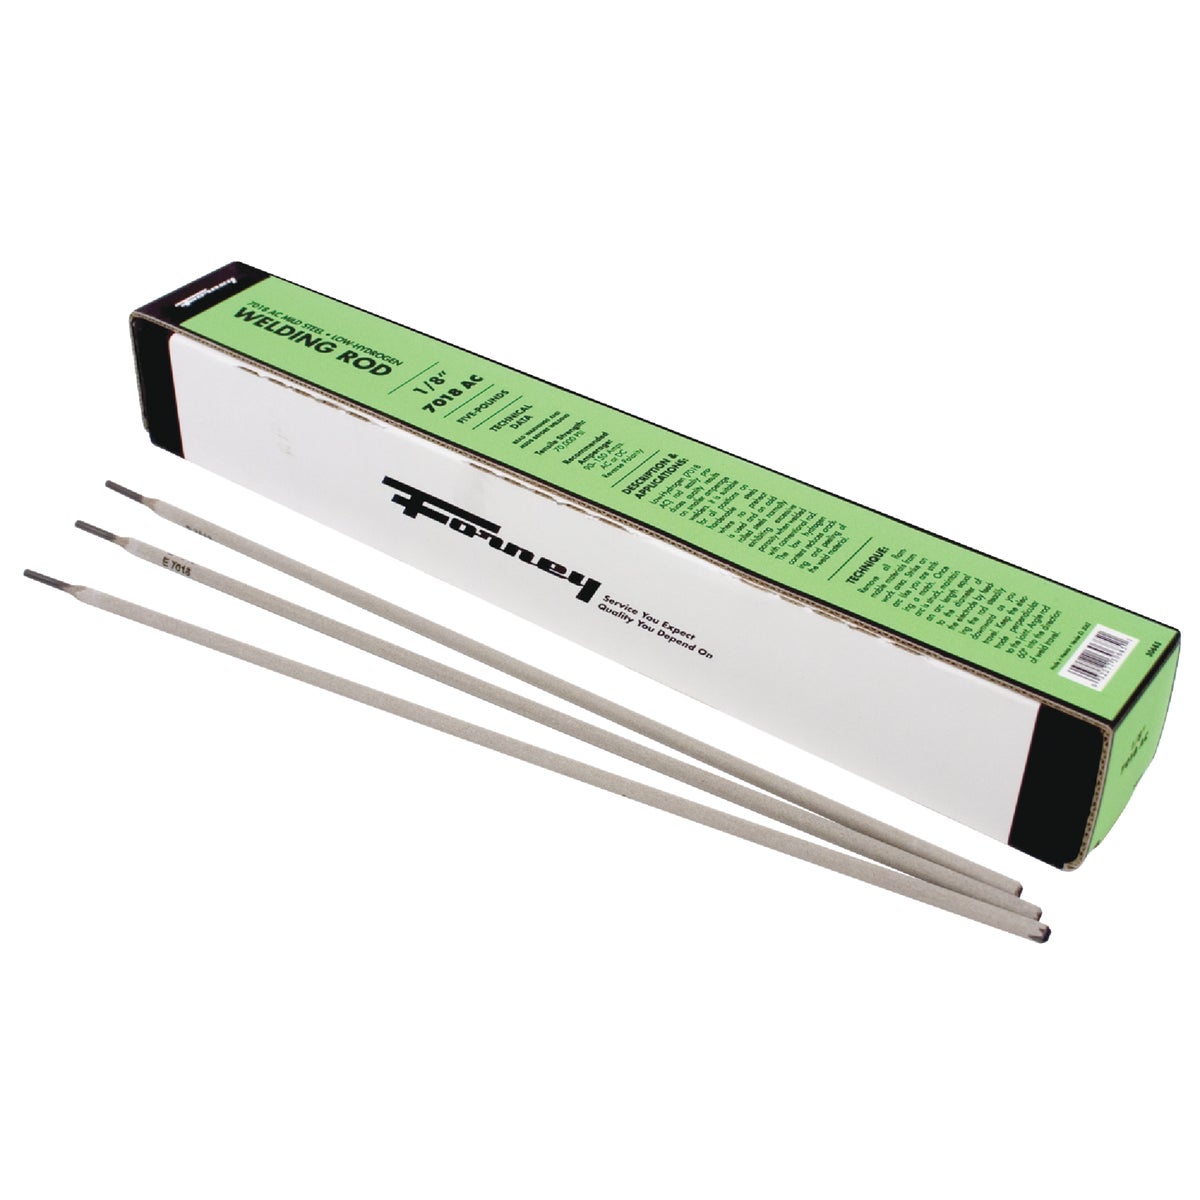 Forney E7018 AC Low Hydrogen Electrode, 1/8 In. 5 Lb.